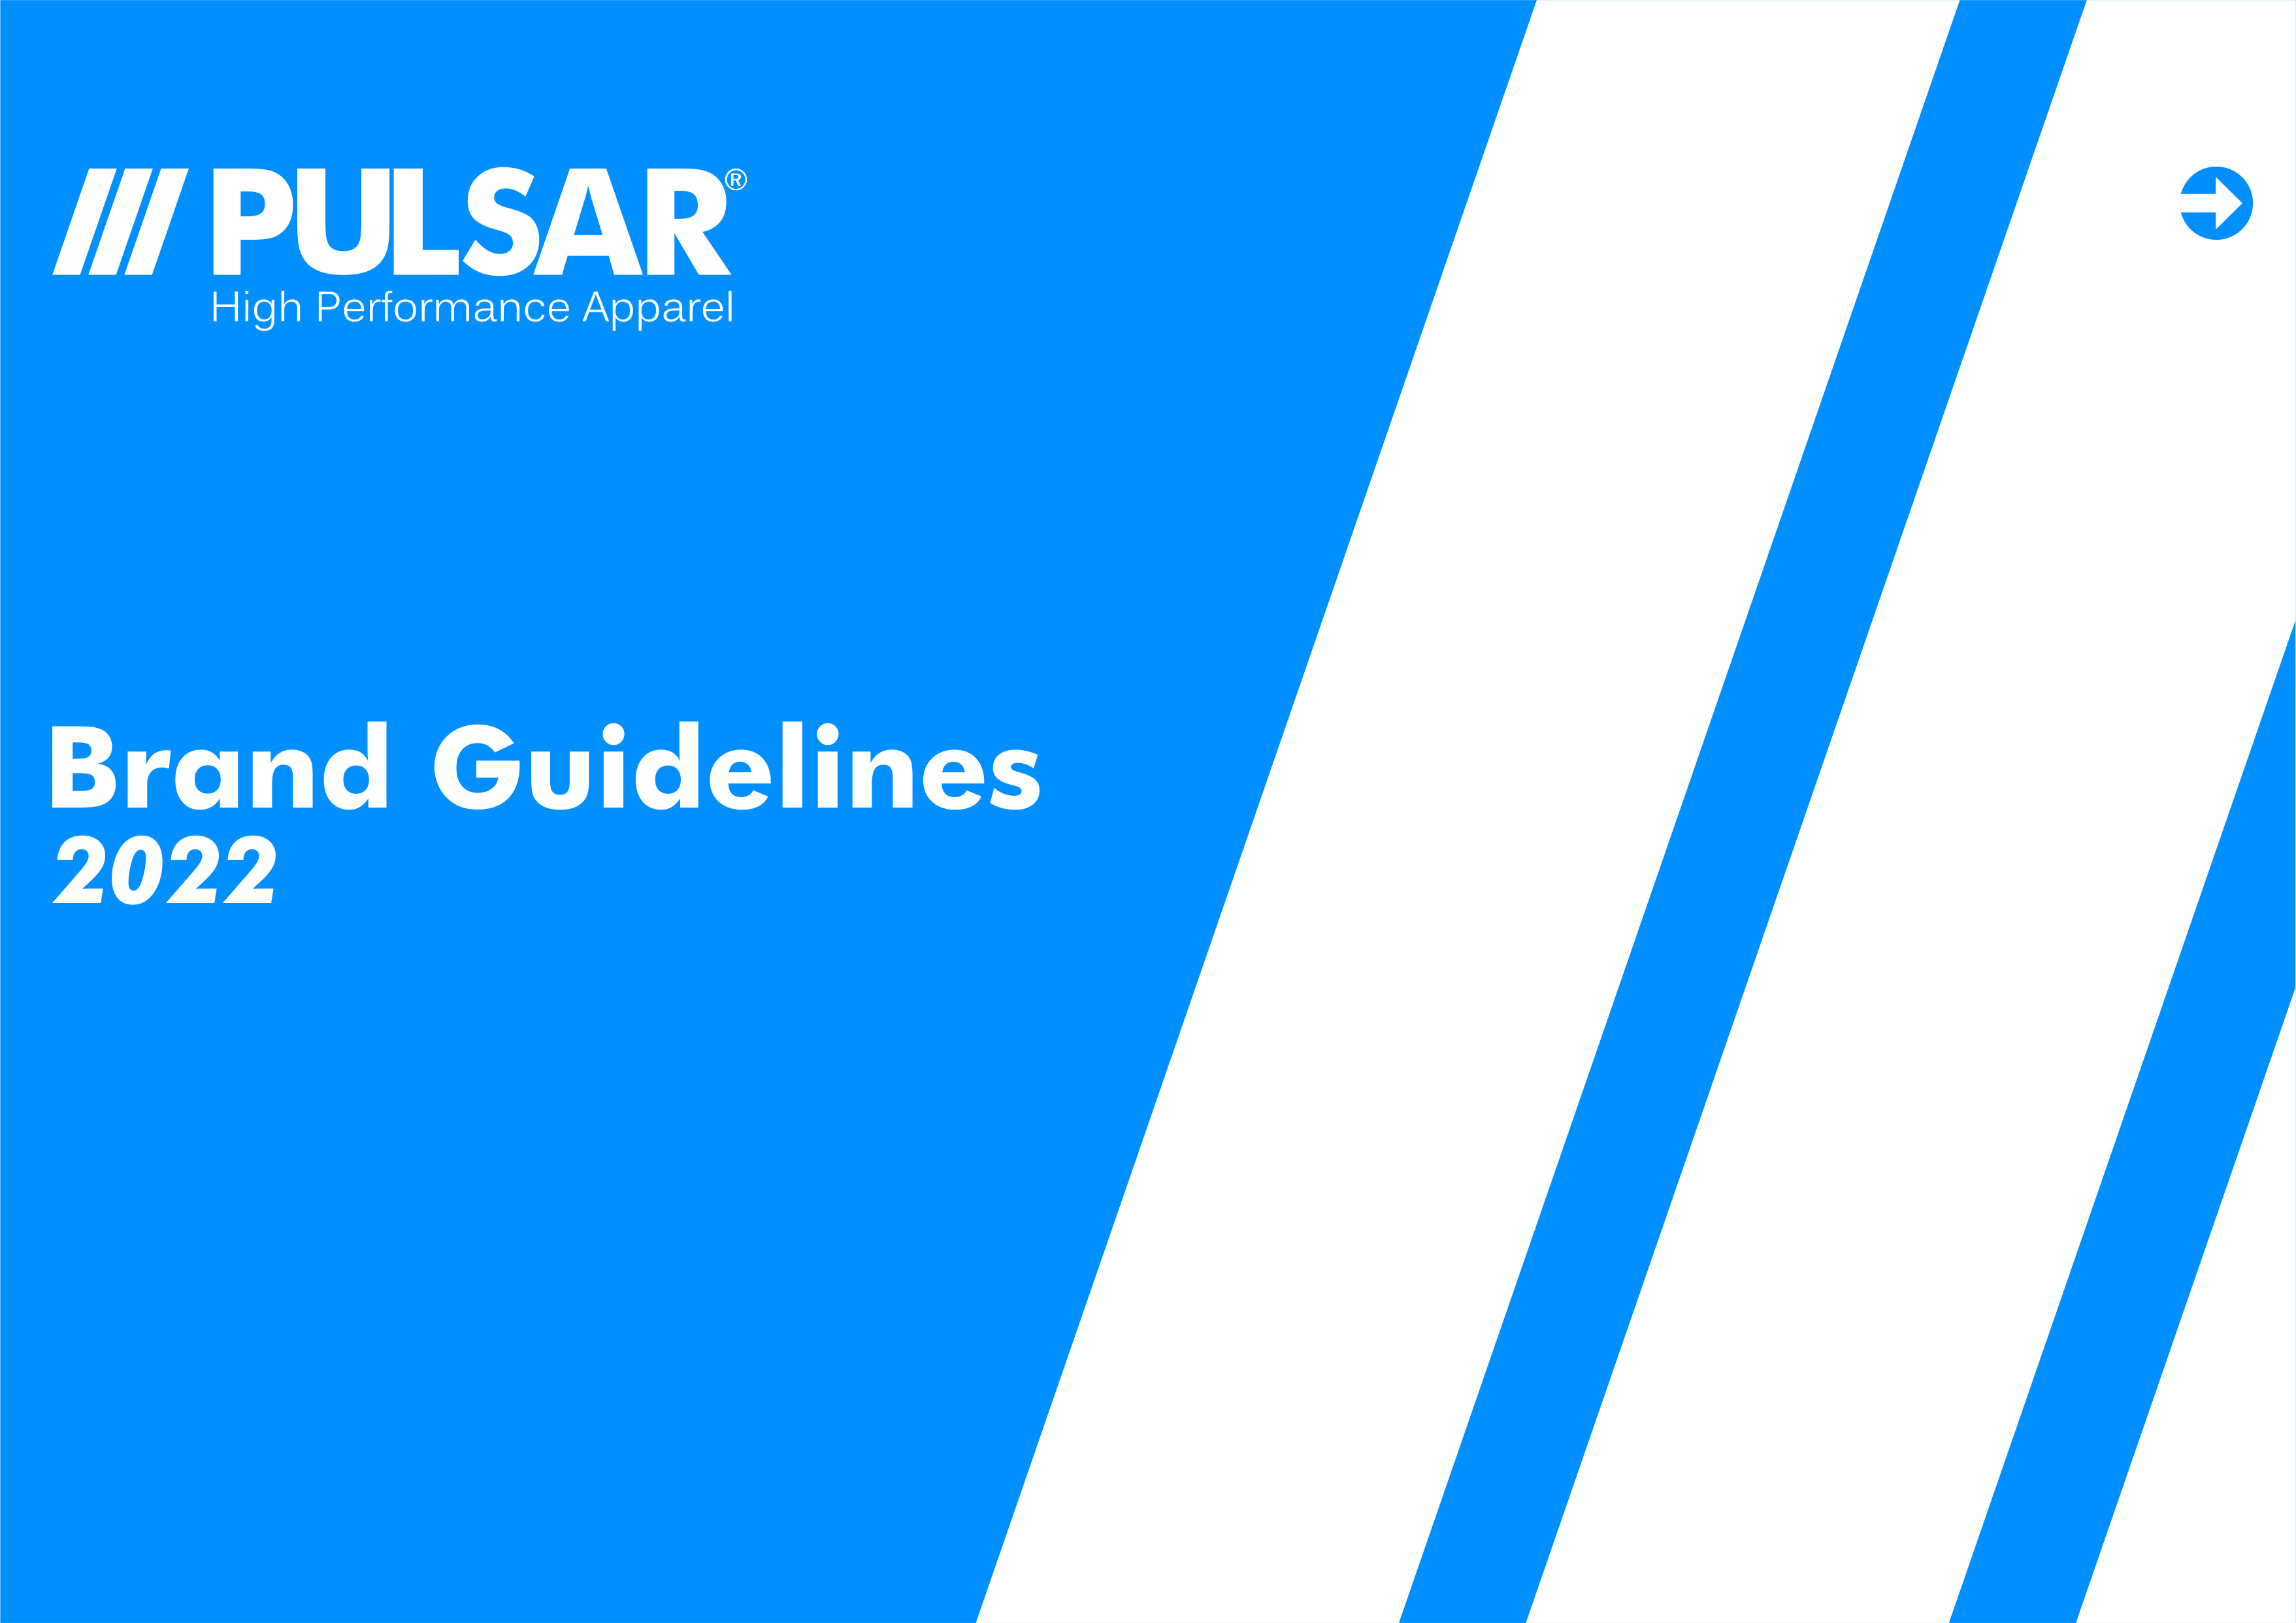 PULSAR® BRAND GUIDELINES